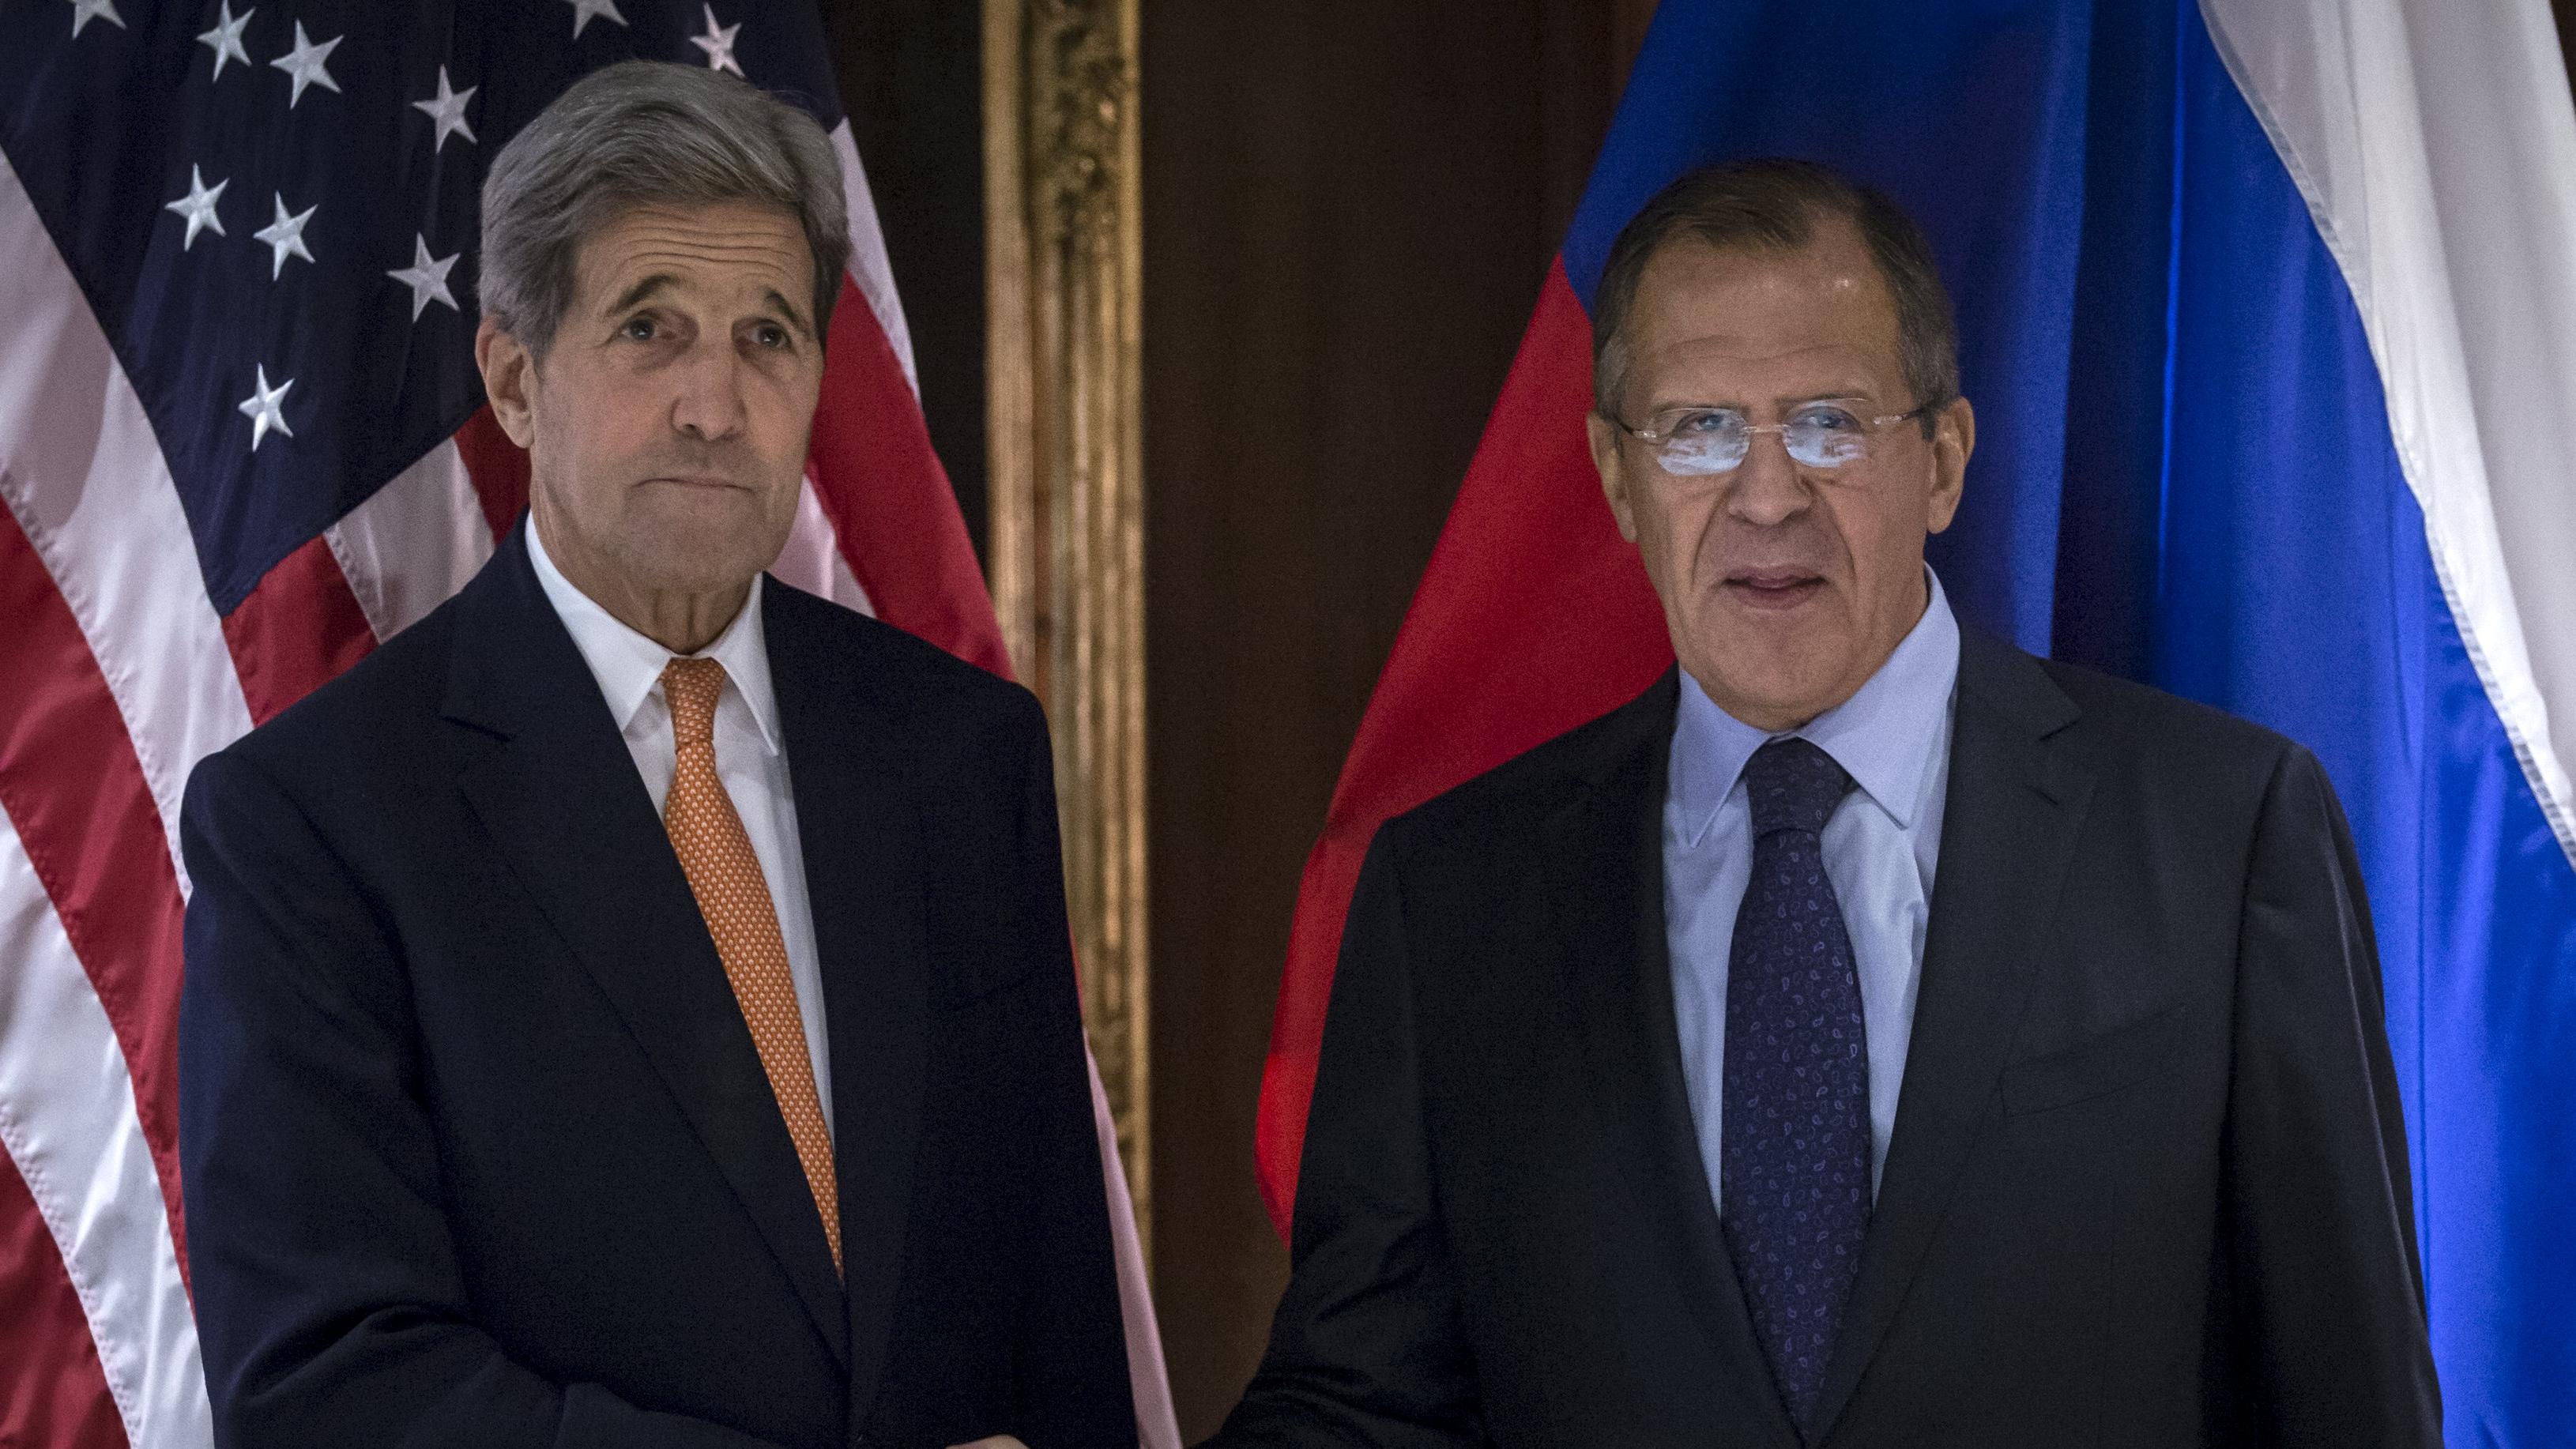 U.S. Secretary of State John Kerry (L) and Russian Foreign Minister Sergey Lavrov shake hands during a photo opportunity in Vienna, Oct. 23, 2015.